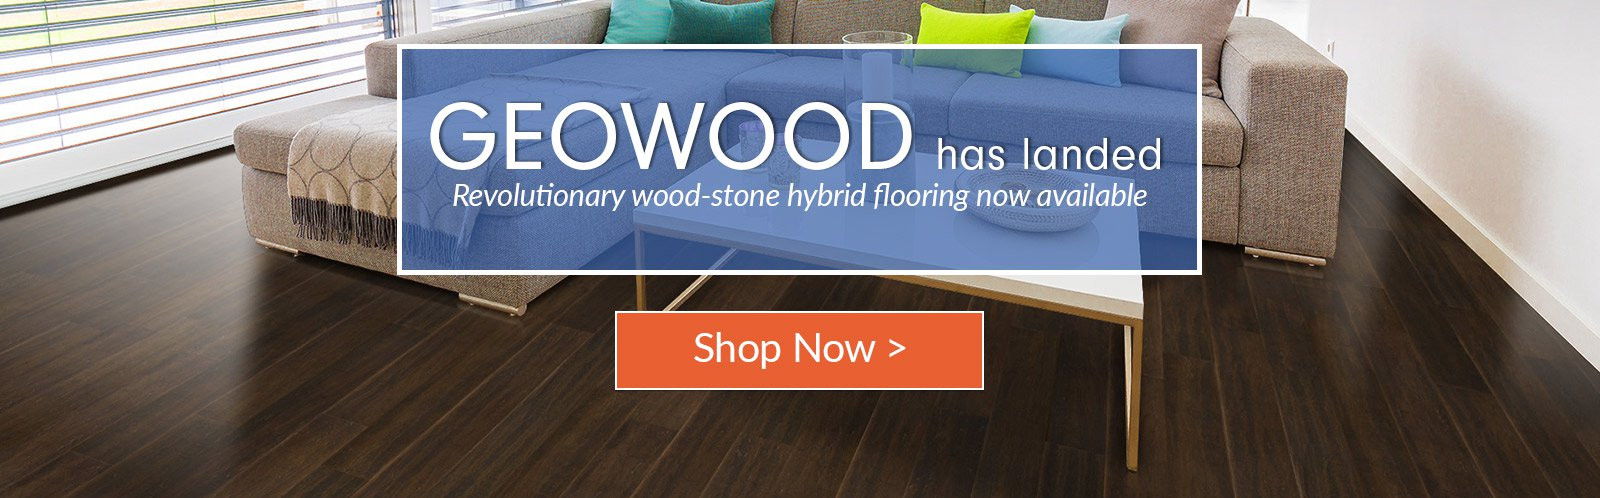 30 attractive Arizona Hardwood Floor Supply 2024 free download arizona hardwood floor supply of green building construction materials and home decor cali bamboo within geowood launch homepage slider